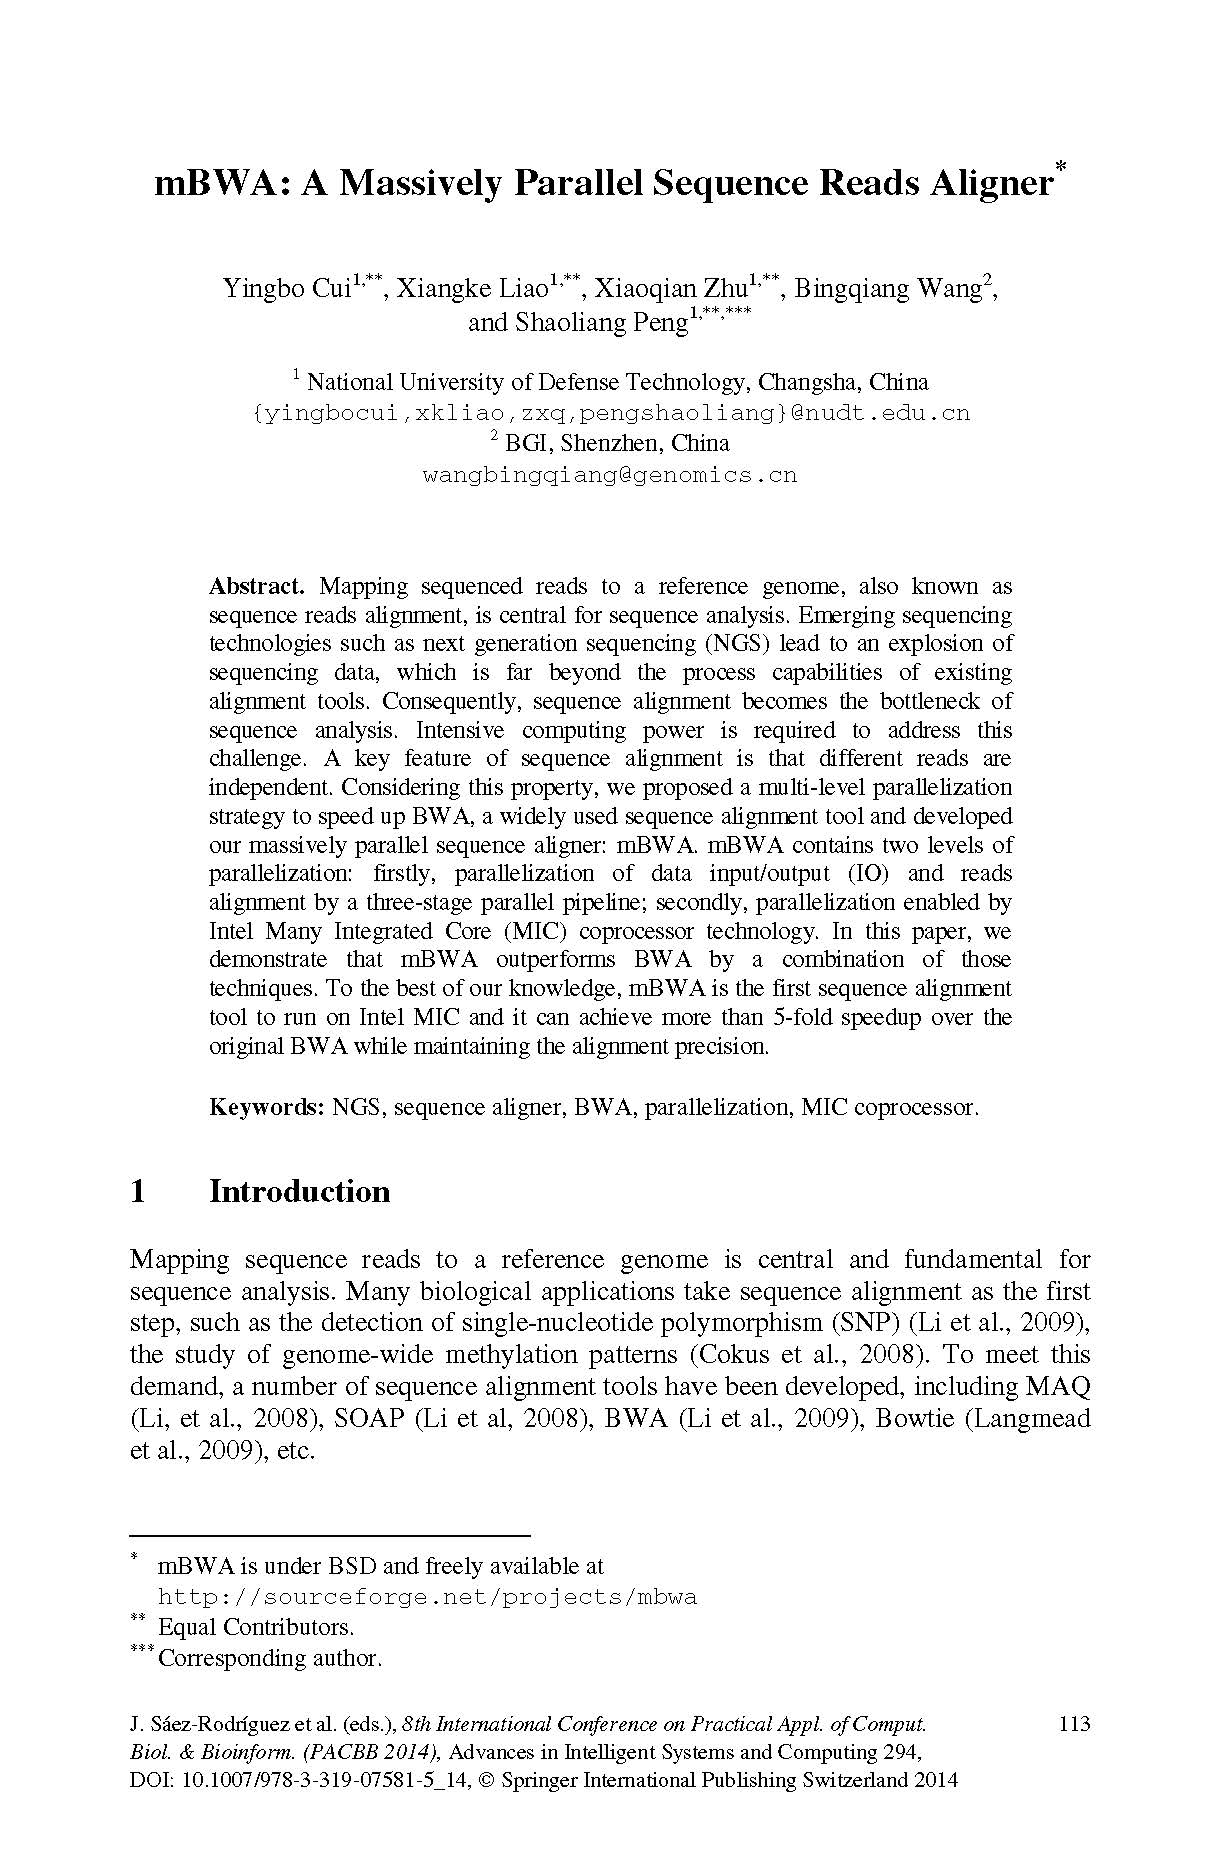 [57] Cui, Y., Liao, X., Zhu, X.,Wang, B., & Peng, S. (2014). mBWA: A massively parallel sequencereads aligner. In 8th International Conference on Practical Applicationsof Computational Biology & Bioinformatics (PACBB 2014) (pp. 113-120).Springer, Cham.